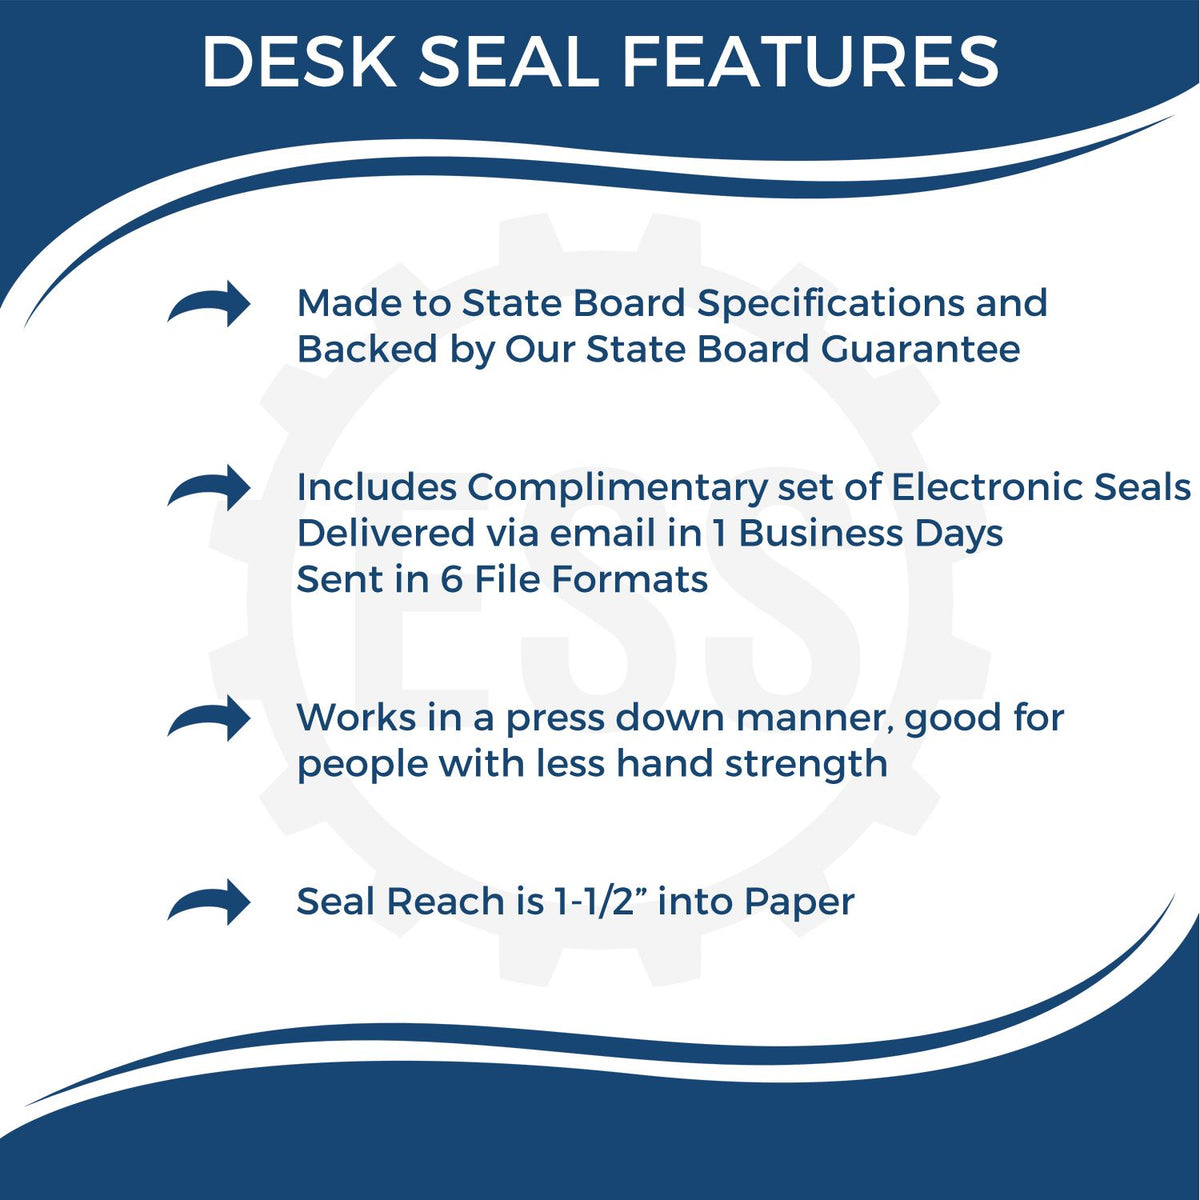 A picture of an infographic highlighting the selling points for the Minnesota Desk Surveyor Seal Embosser